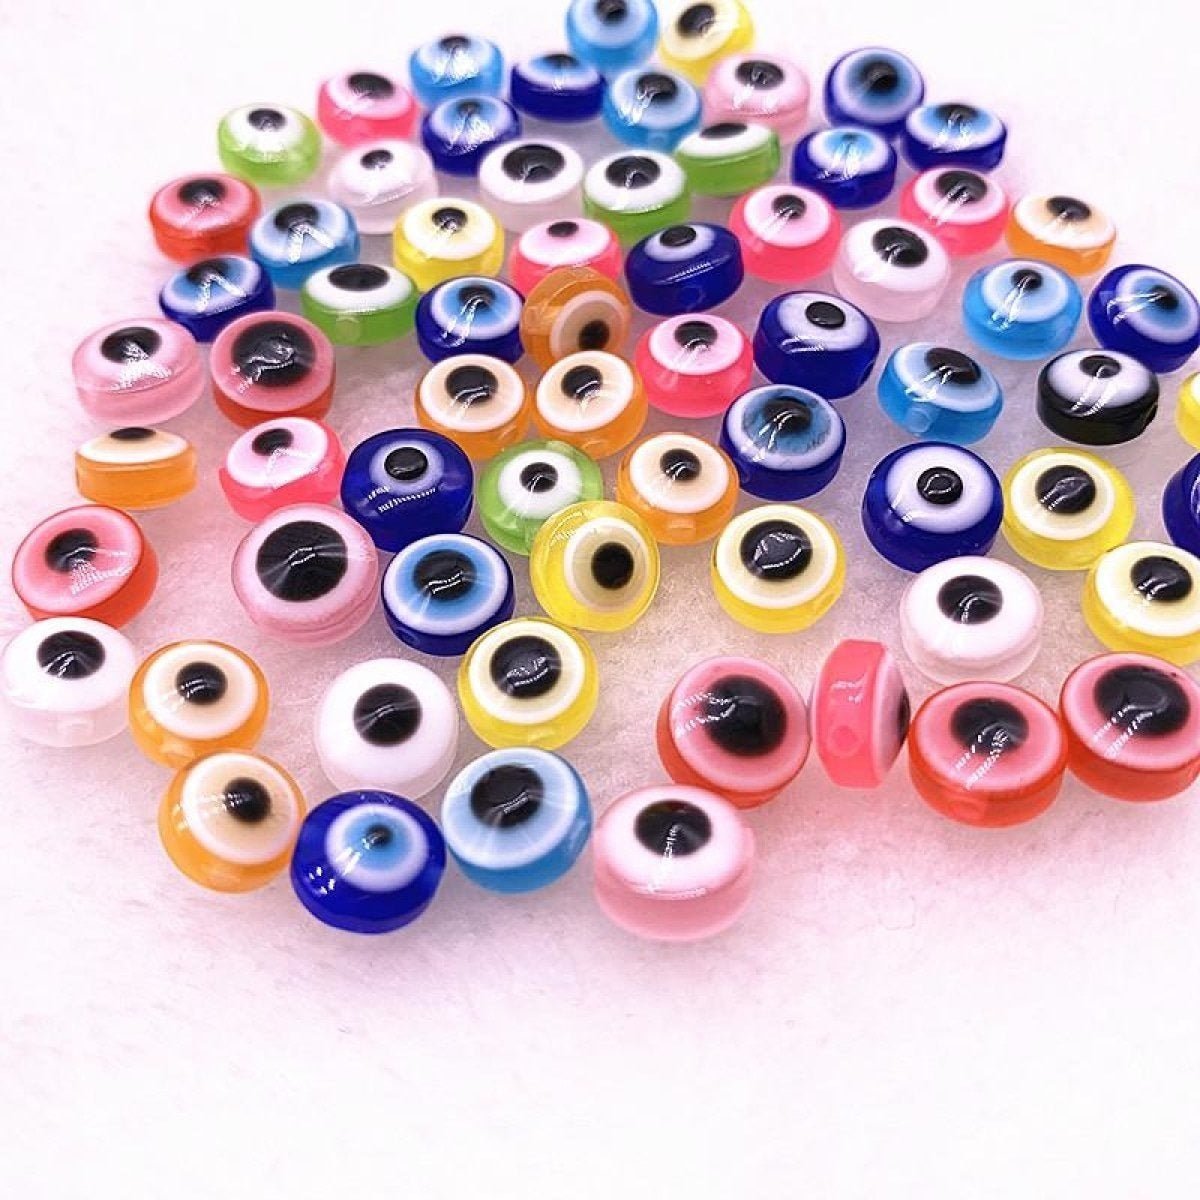 48pcs 8/10mm Oval Resin Spacer Beads Double Sided Eyes for Jewellery Making DIY Bracelet Beads Set B - Green 8mm - - Asia Sell